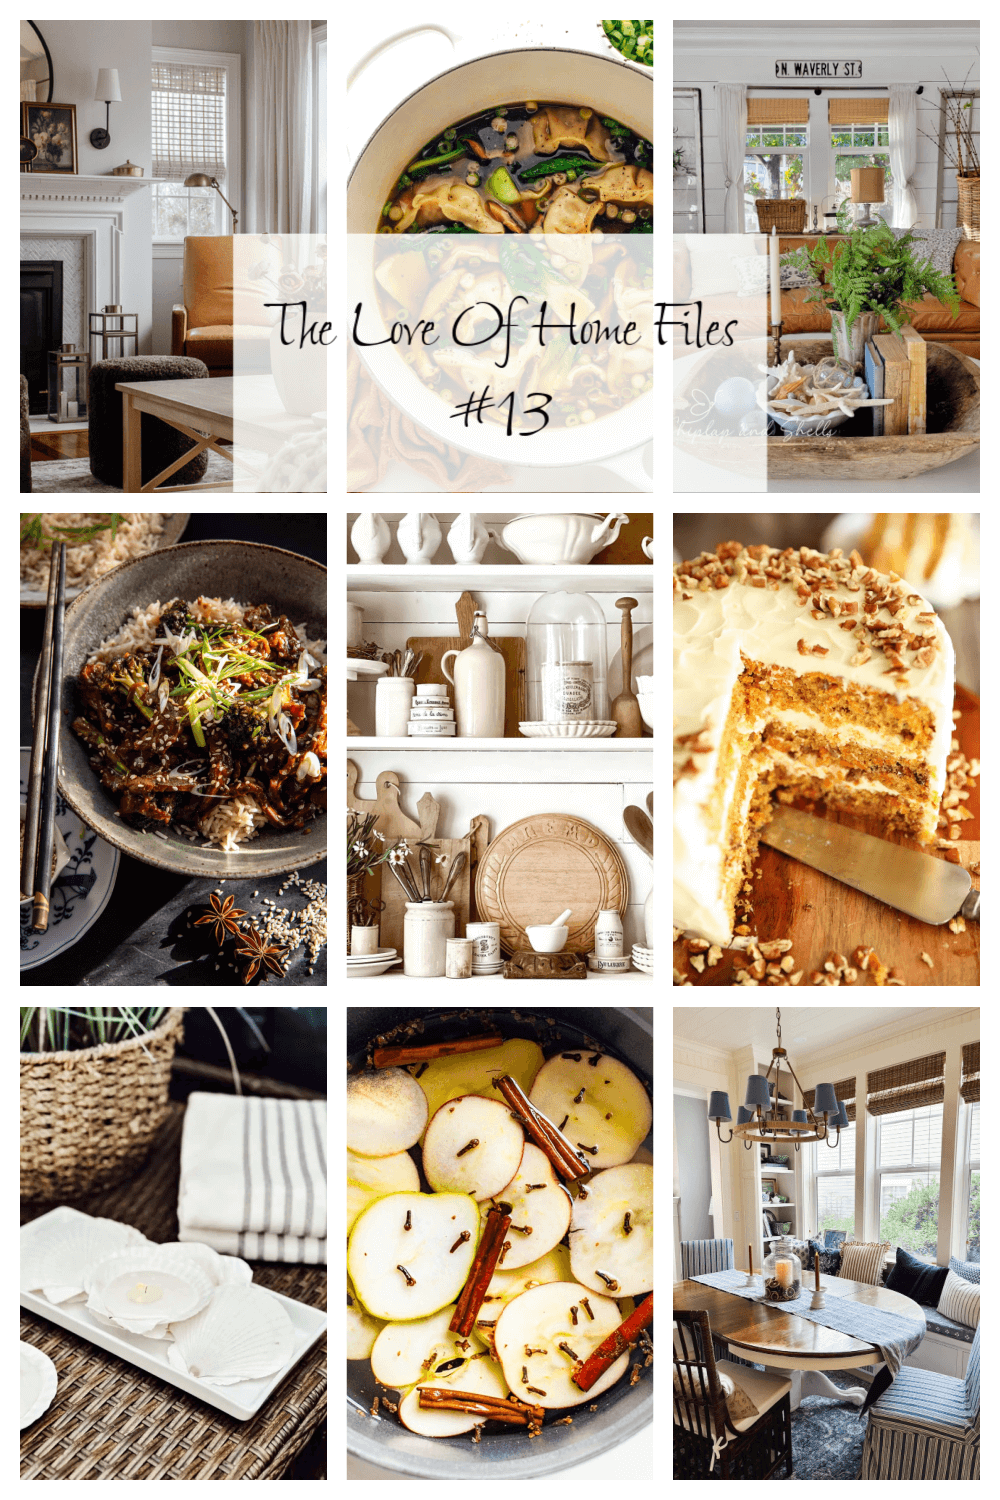 The Love Of Home Files #13 has lots of things to consider doing on a winter day.